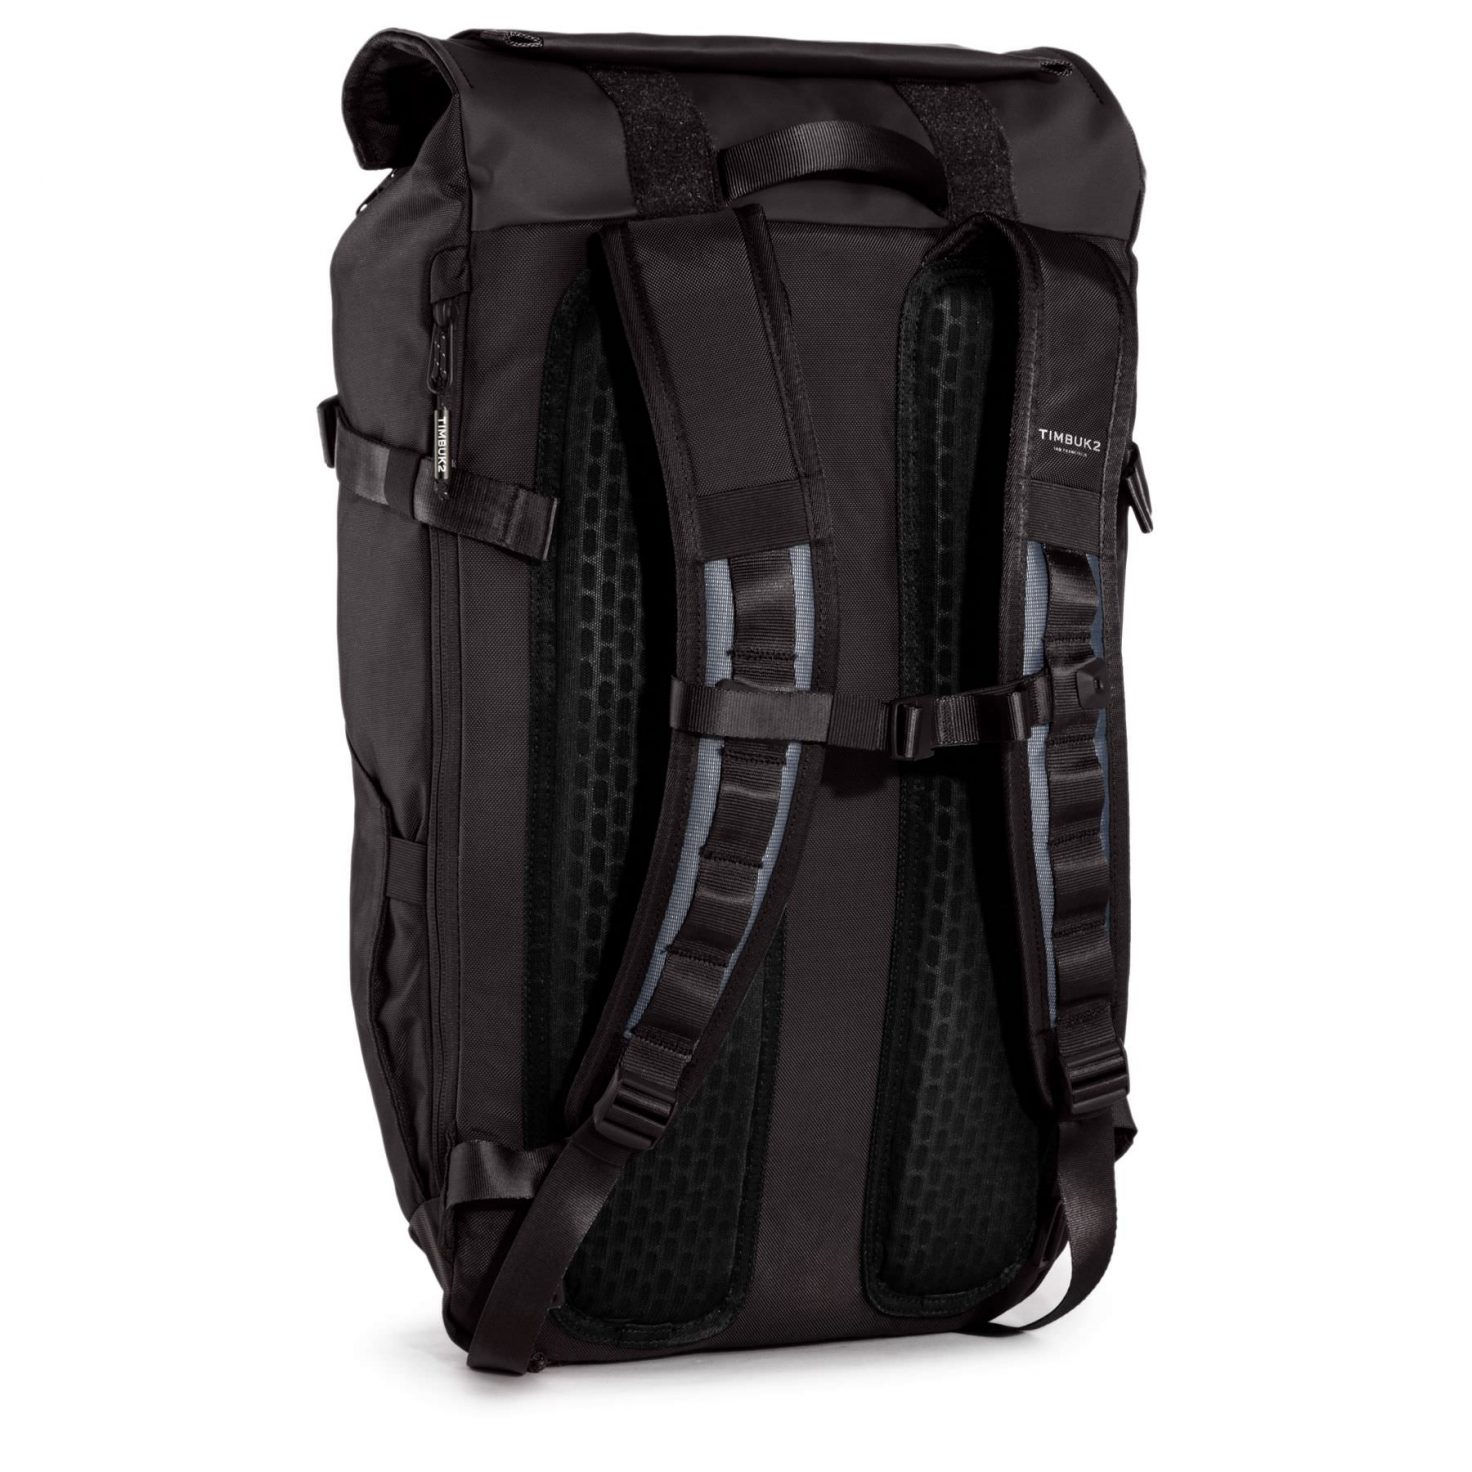 The Timbuk2 Clark Pack - A Tough Bag For Motorcyclists and Cyclists